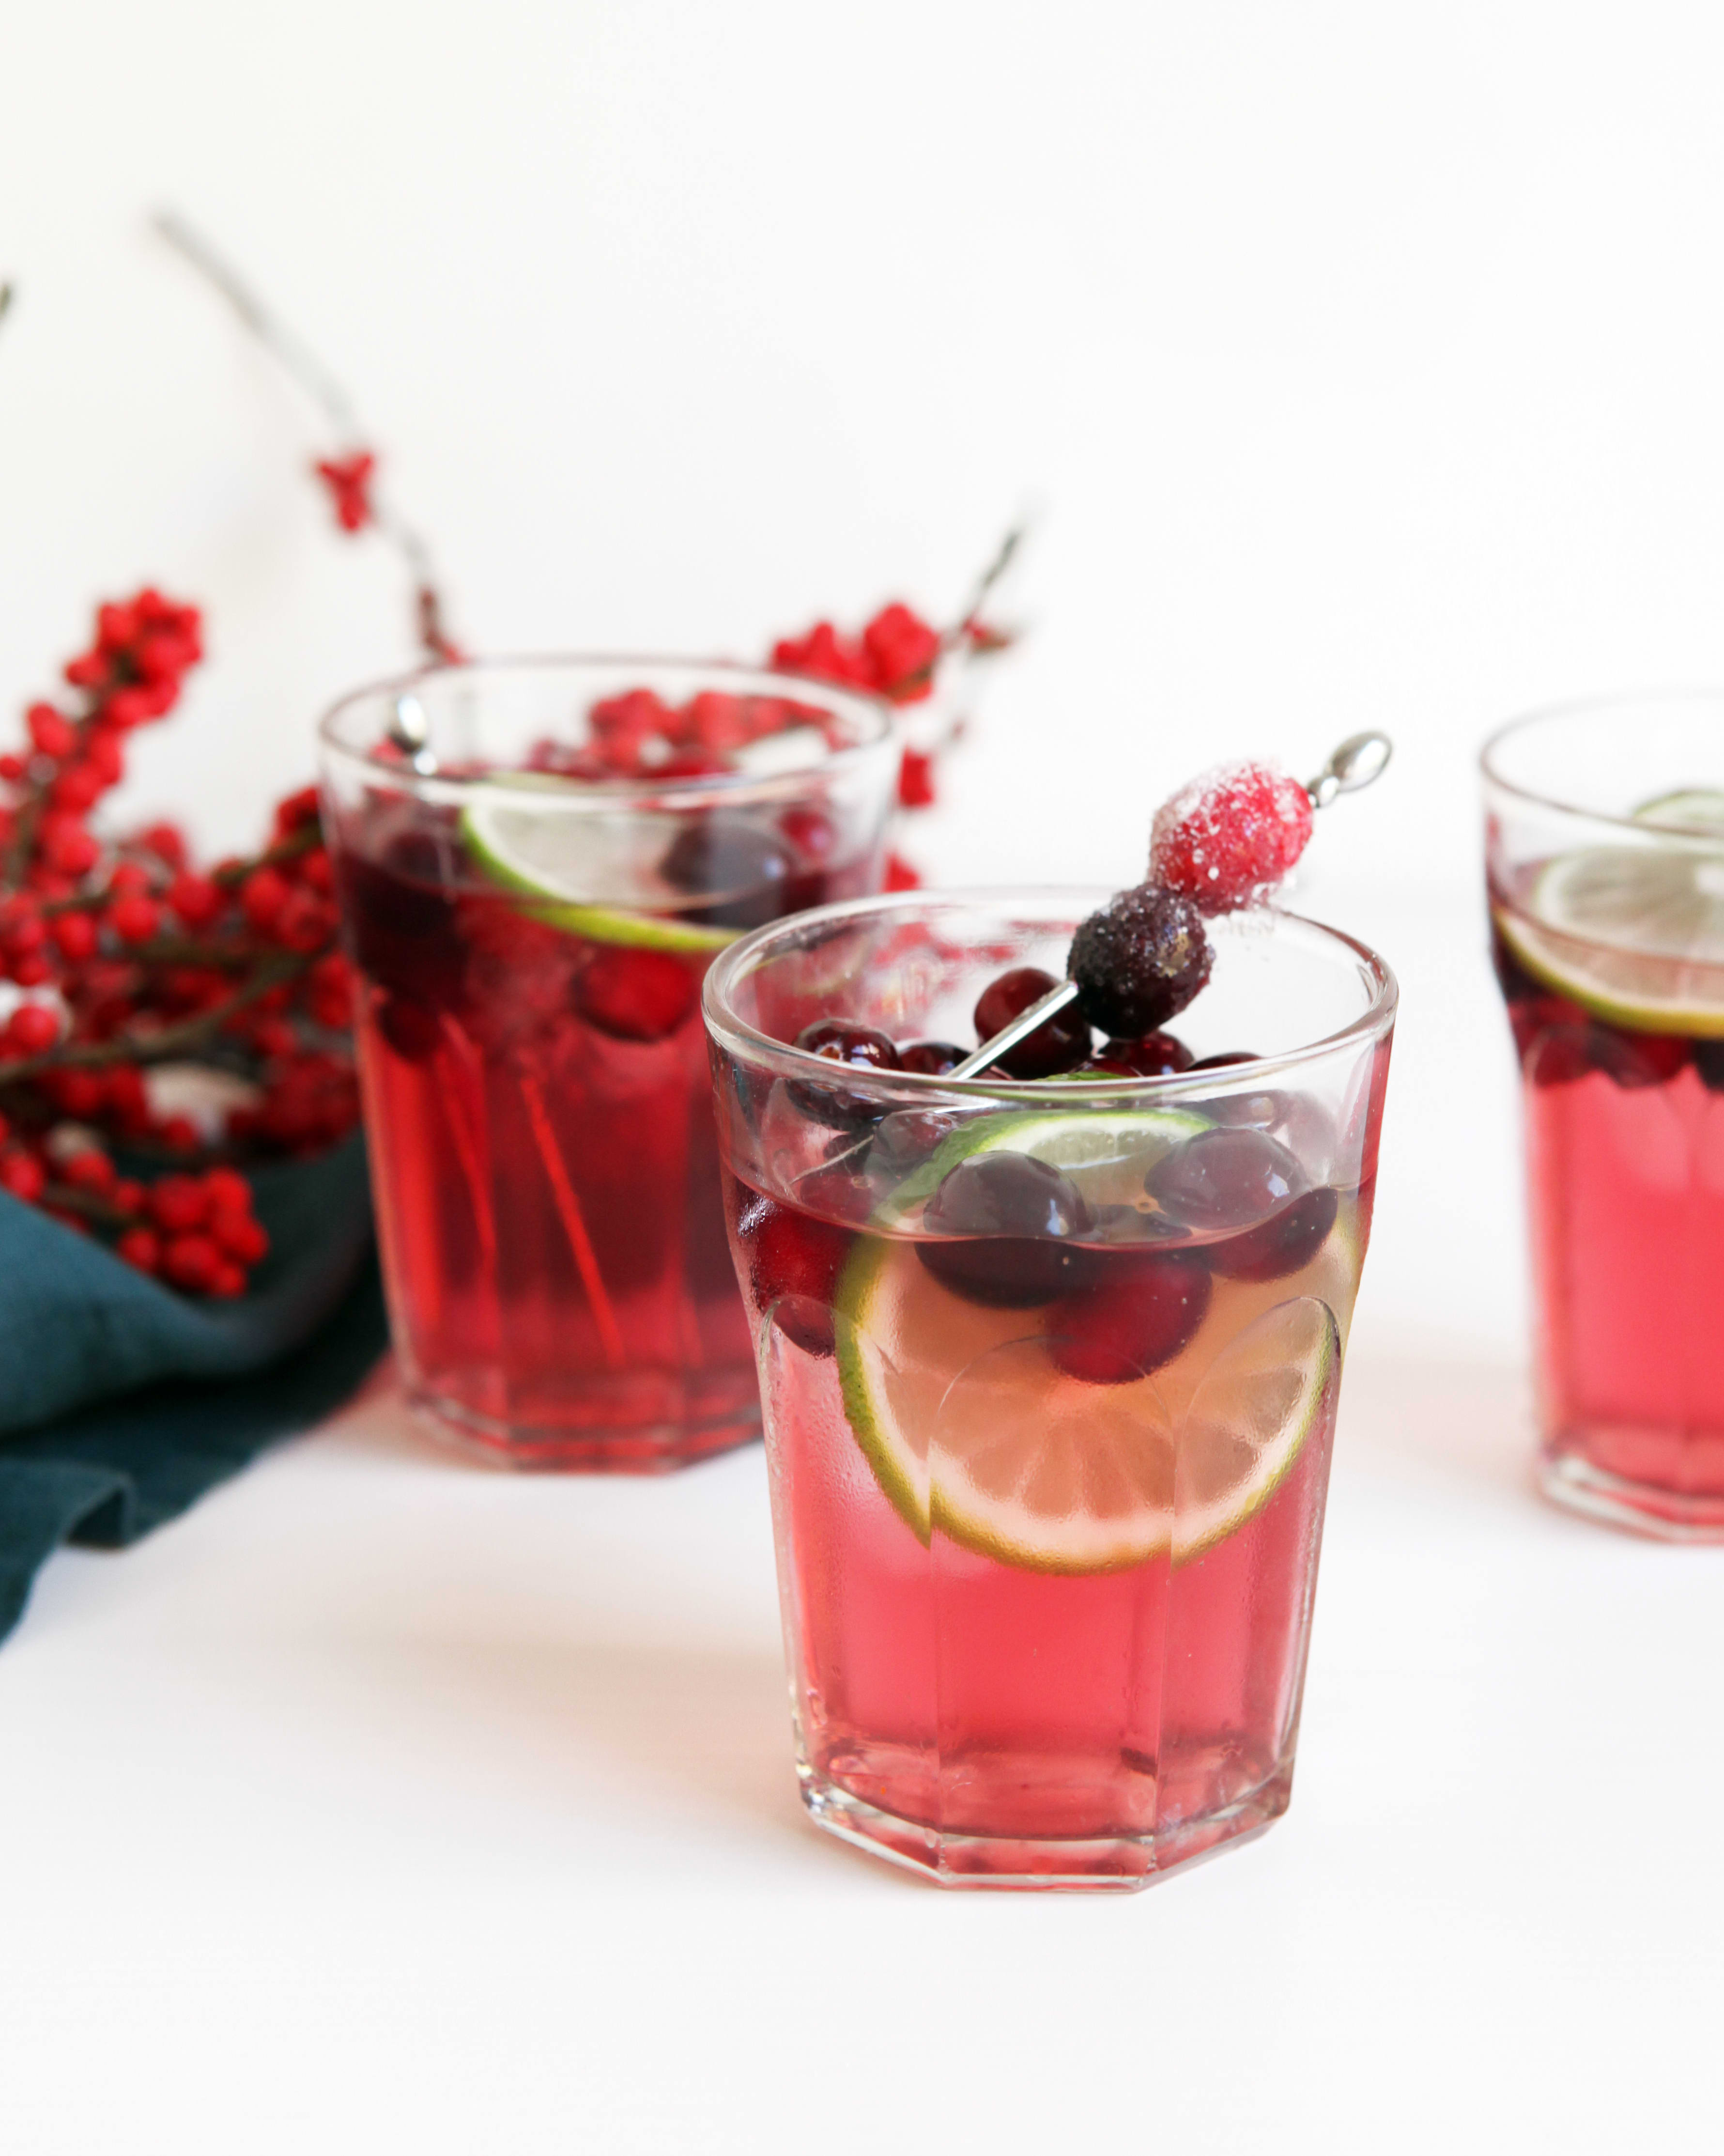 Is Cranberry Juice The Same As Cranberry Juice Cocktail? 